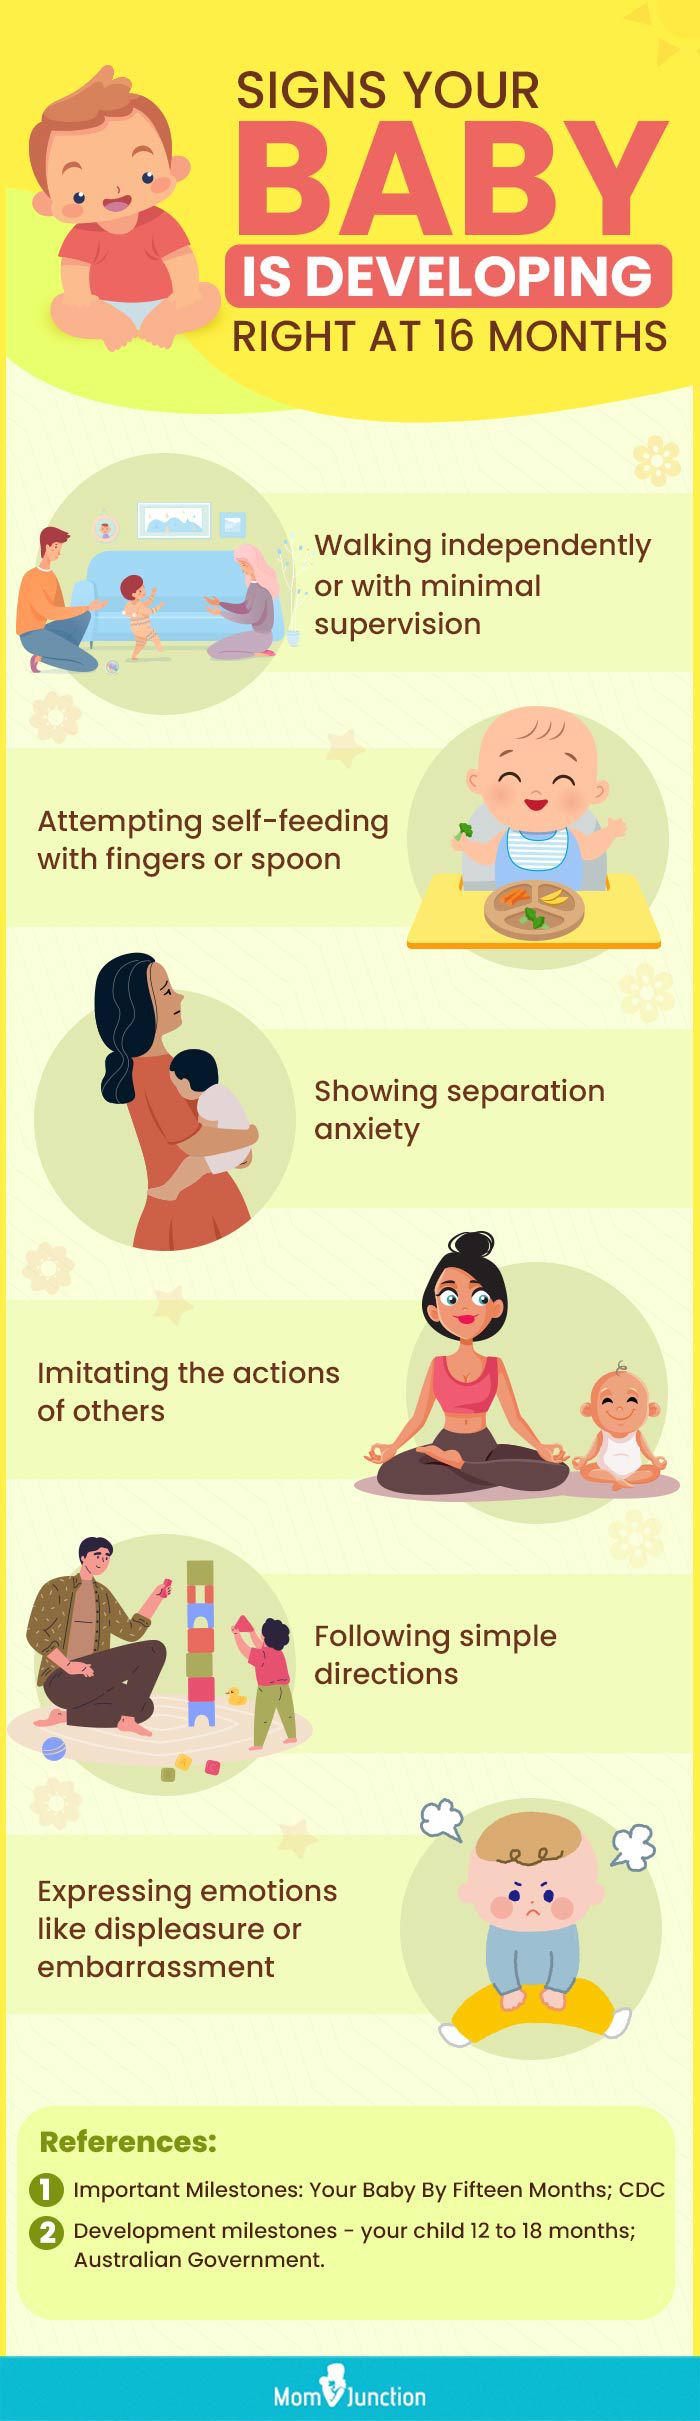 signs your baby is developing right at 16 months (infographic) 